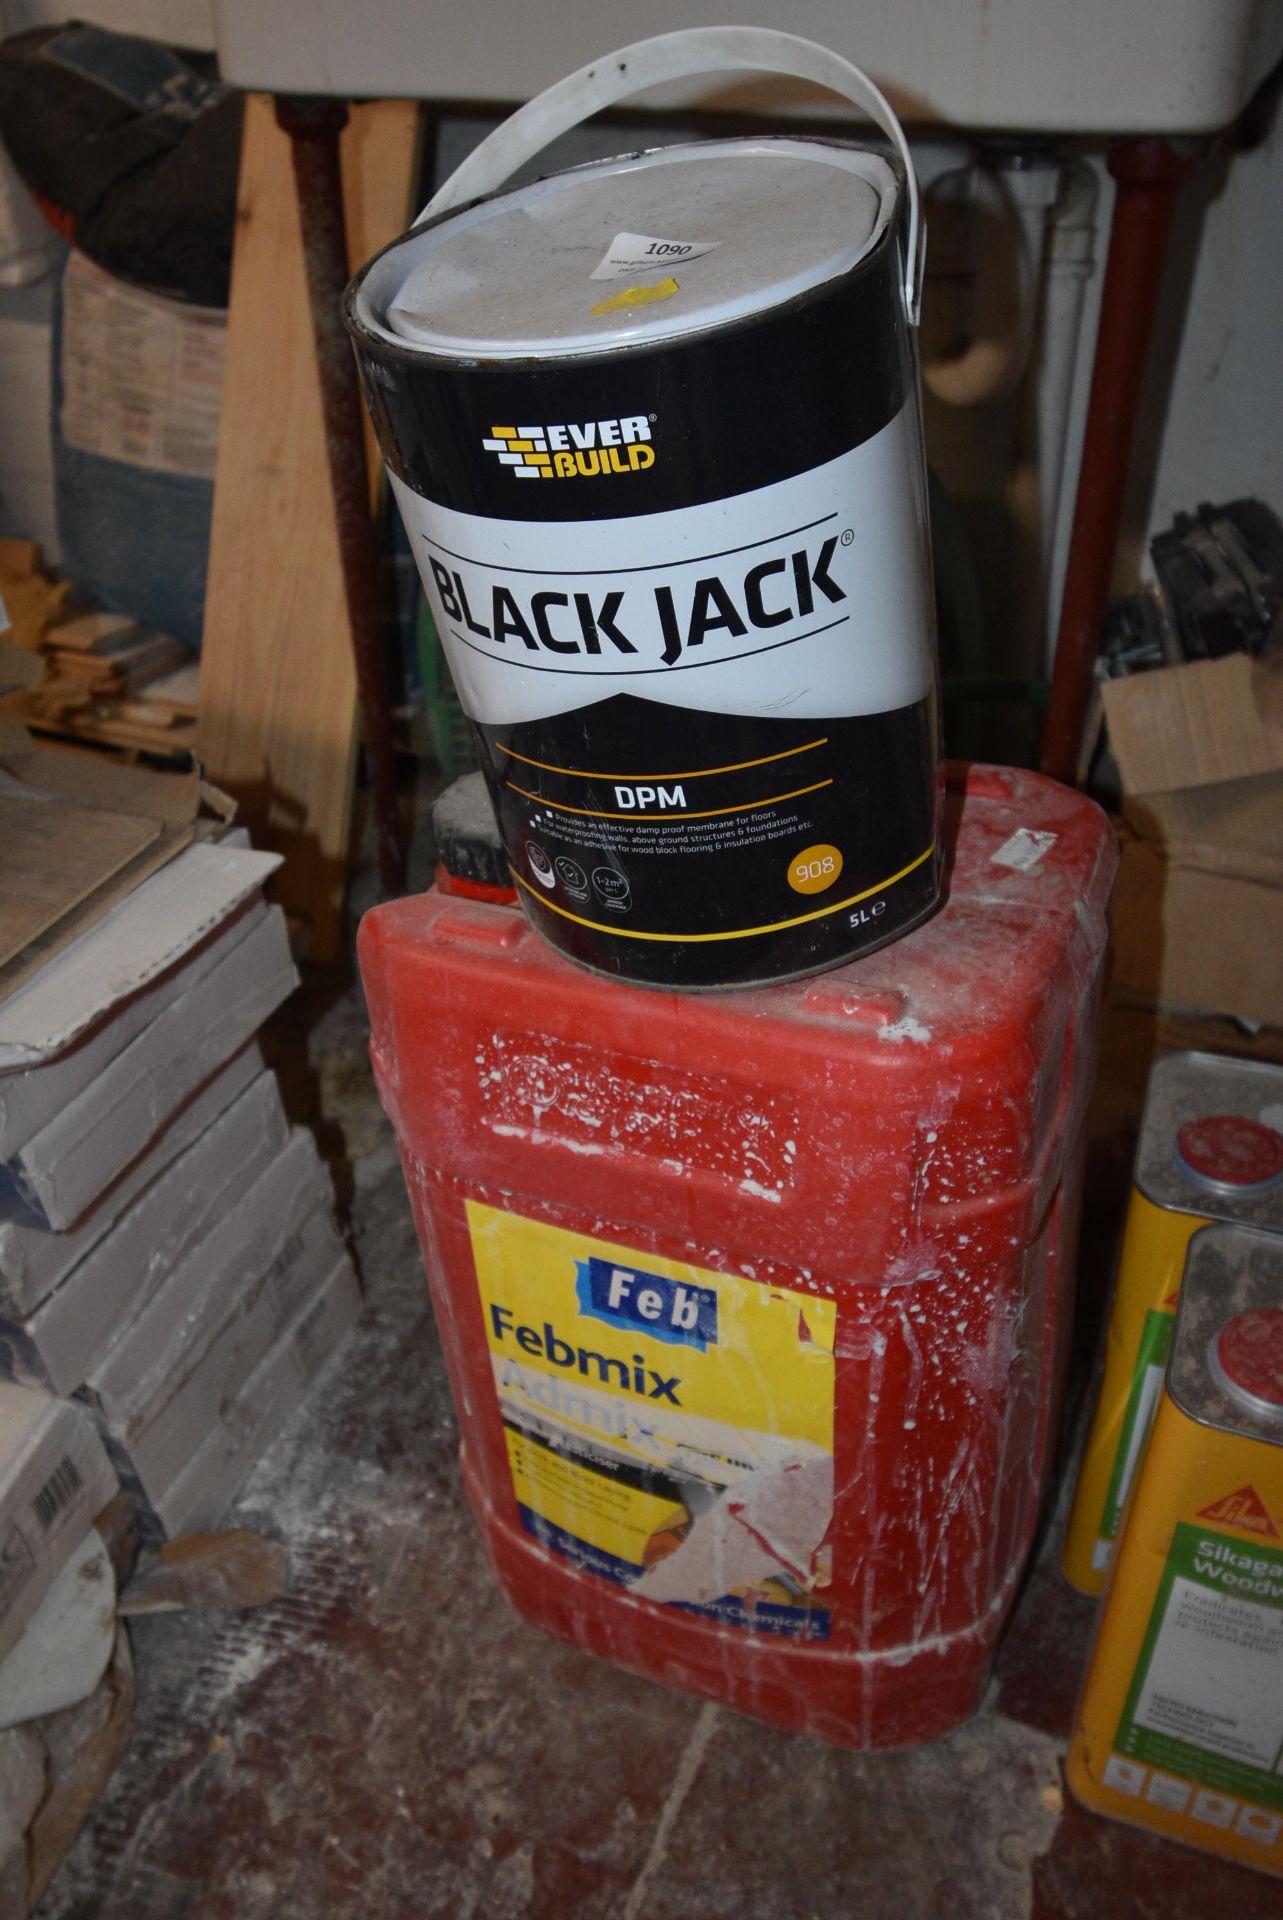 *Part Tub of Fed Mix and Blackjack BPM (Location: 64 King Edward St, Grimsby, DN31 3JP, Viewing